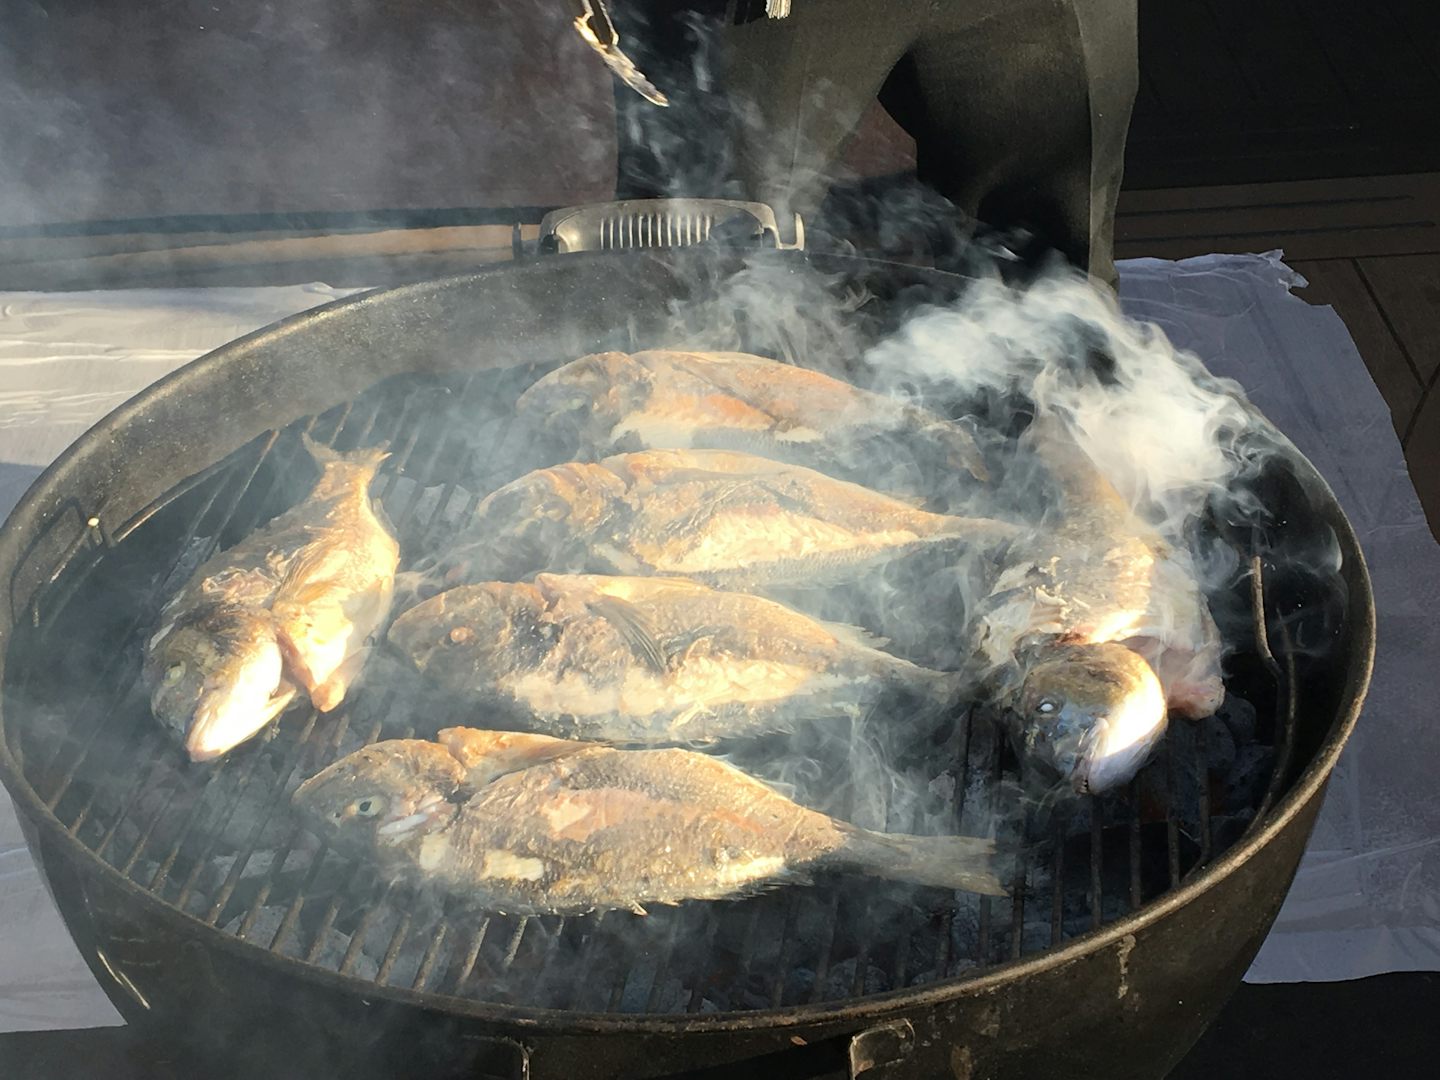 Barbecued Bream